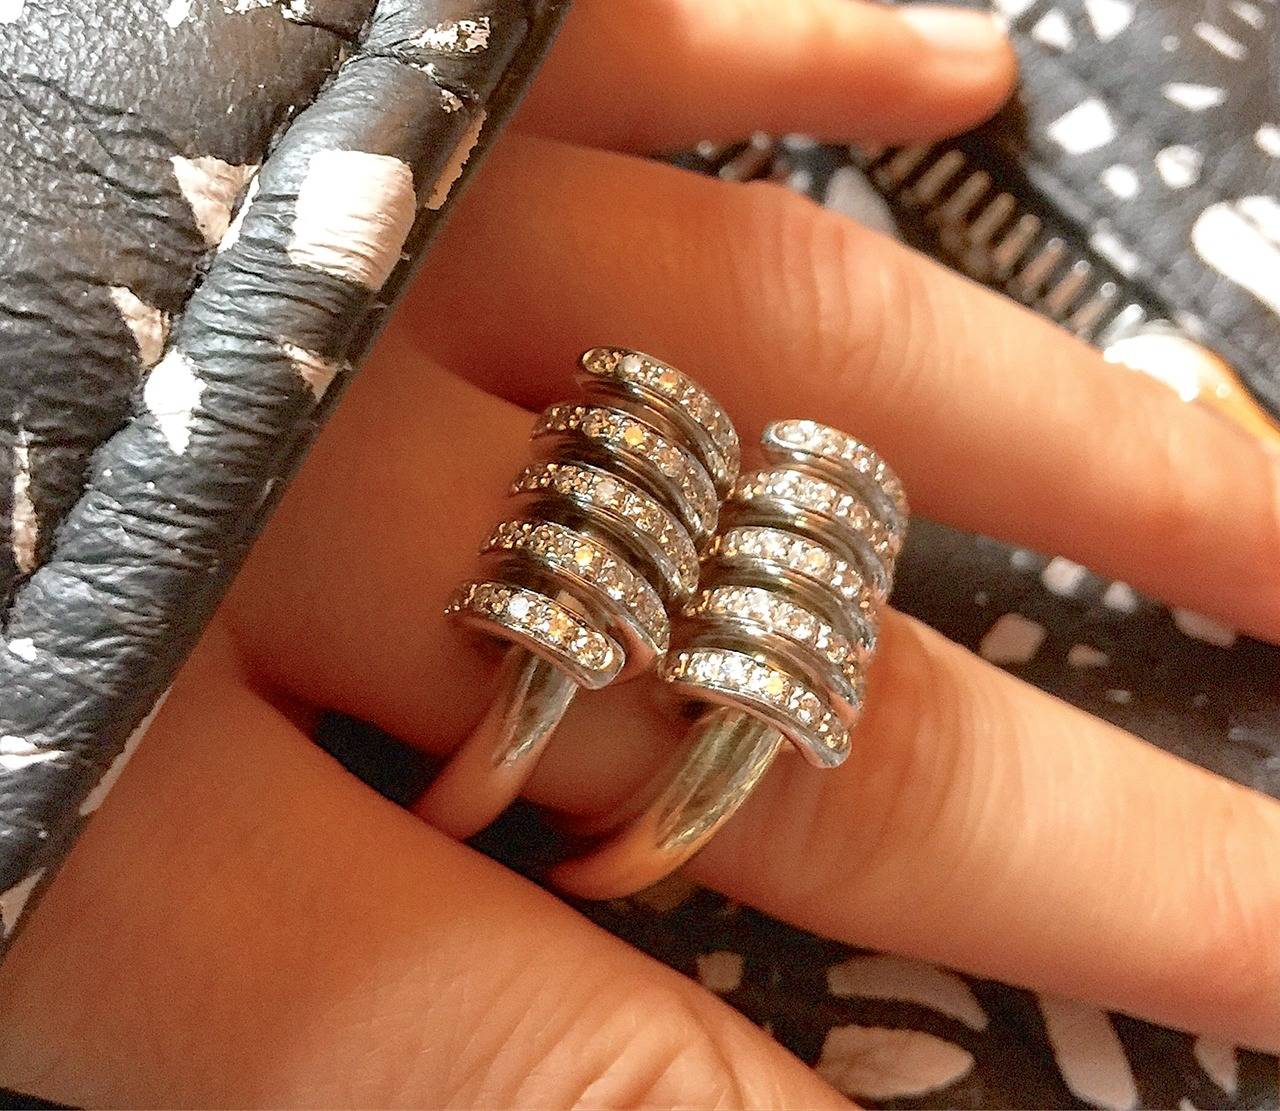 A pair of solid 18k yellow gold and white gold rings with diamond set coils around the top of the ring. Can be worn together or on separate hands or fingers. These rings have substantial weight which contributes to their industrial and masculine